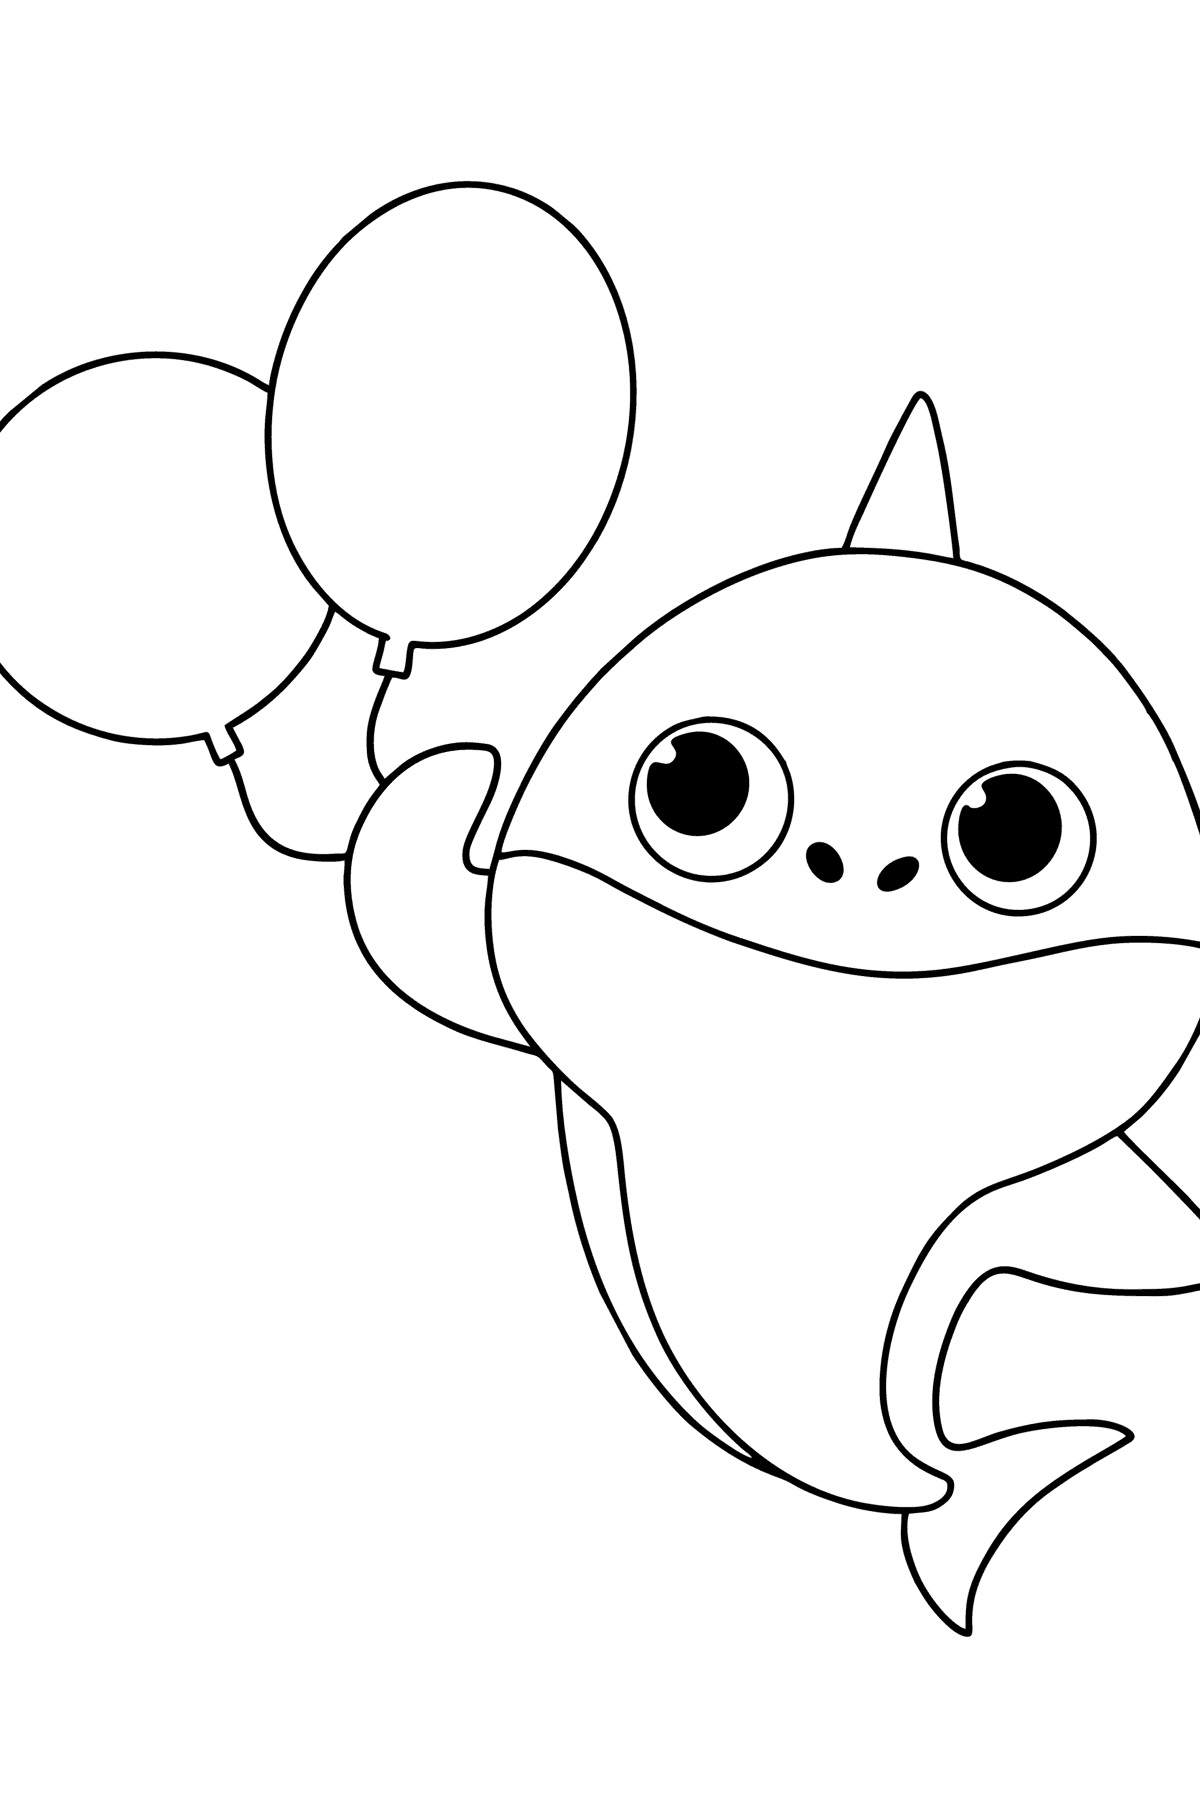 Baby shark coloring page - Coloring Pages for Kids